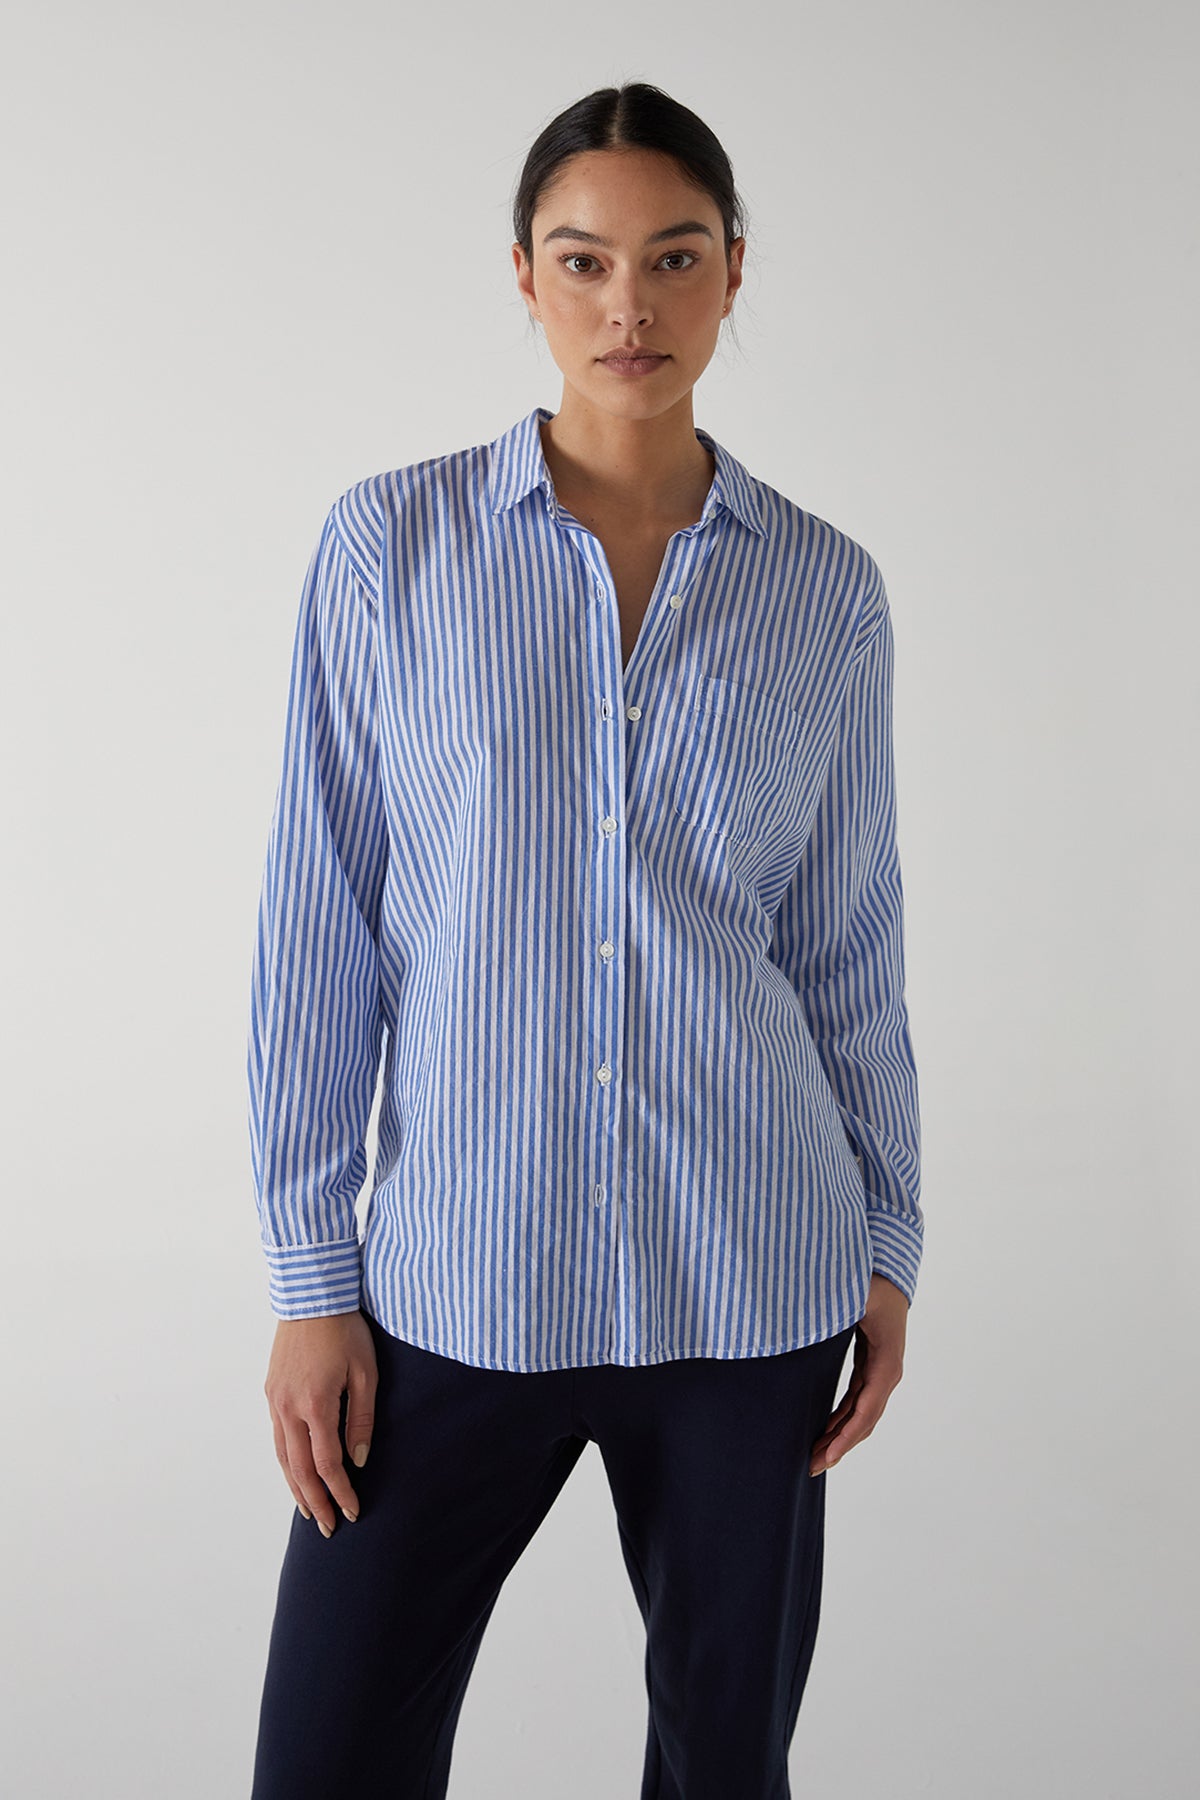   Newport Blue and White Stripe Button Down Cotton Shirt Front 